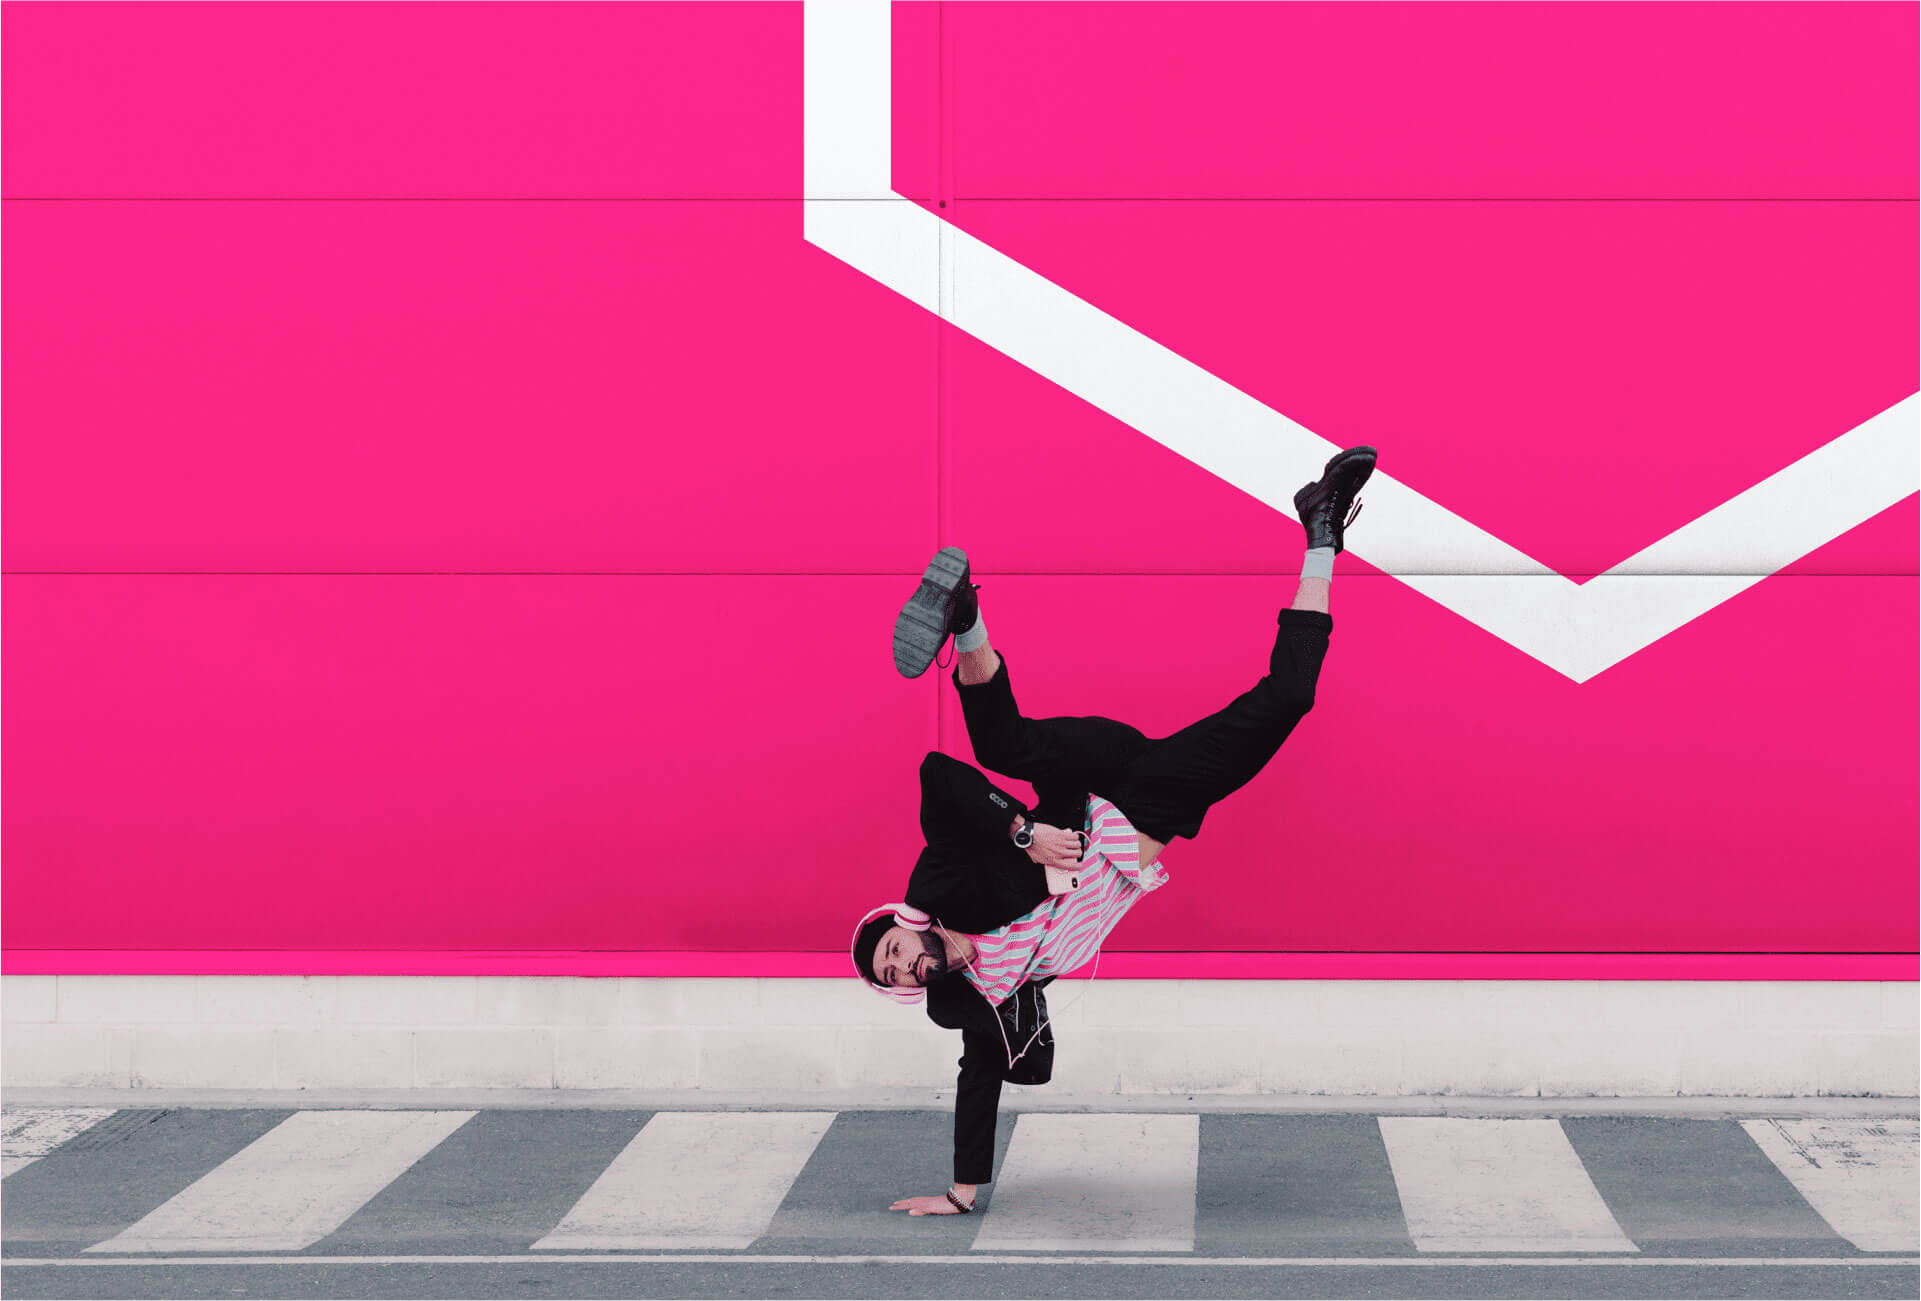 Image of a man break dancing on a crosswalk with pink background with white graphic elements.